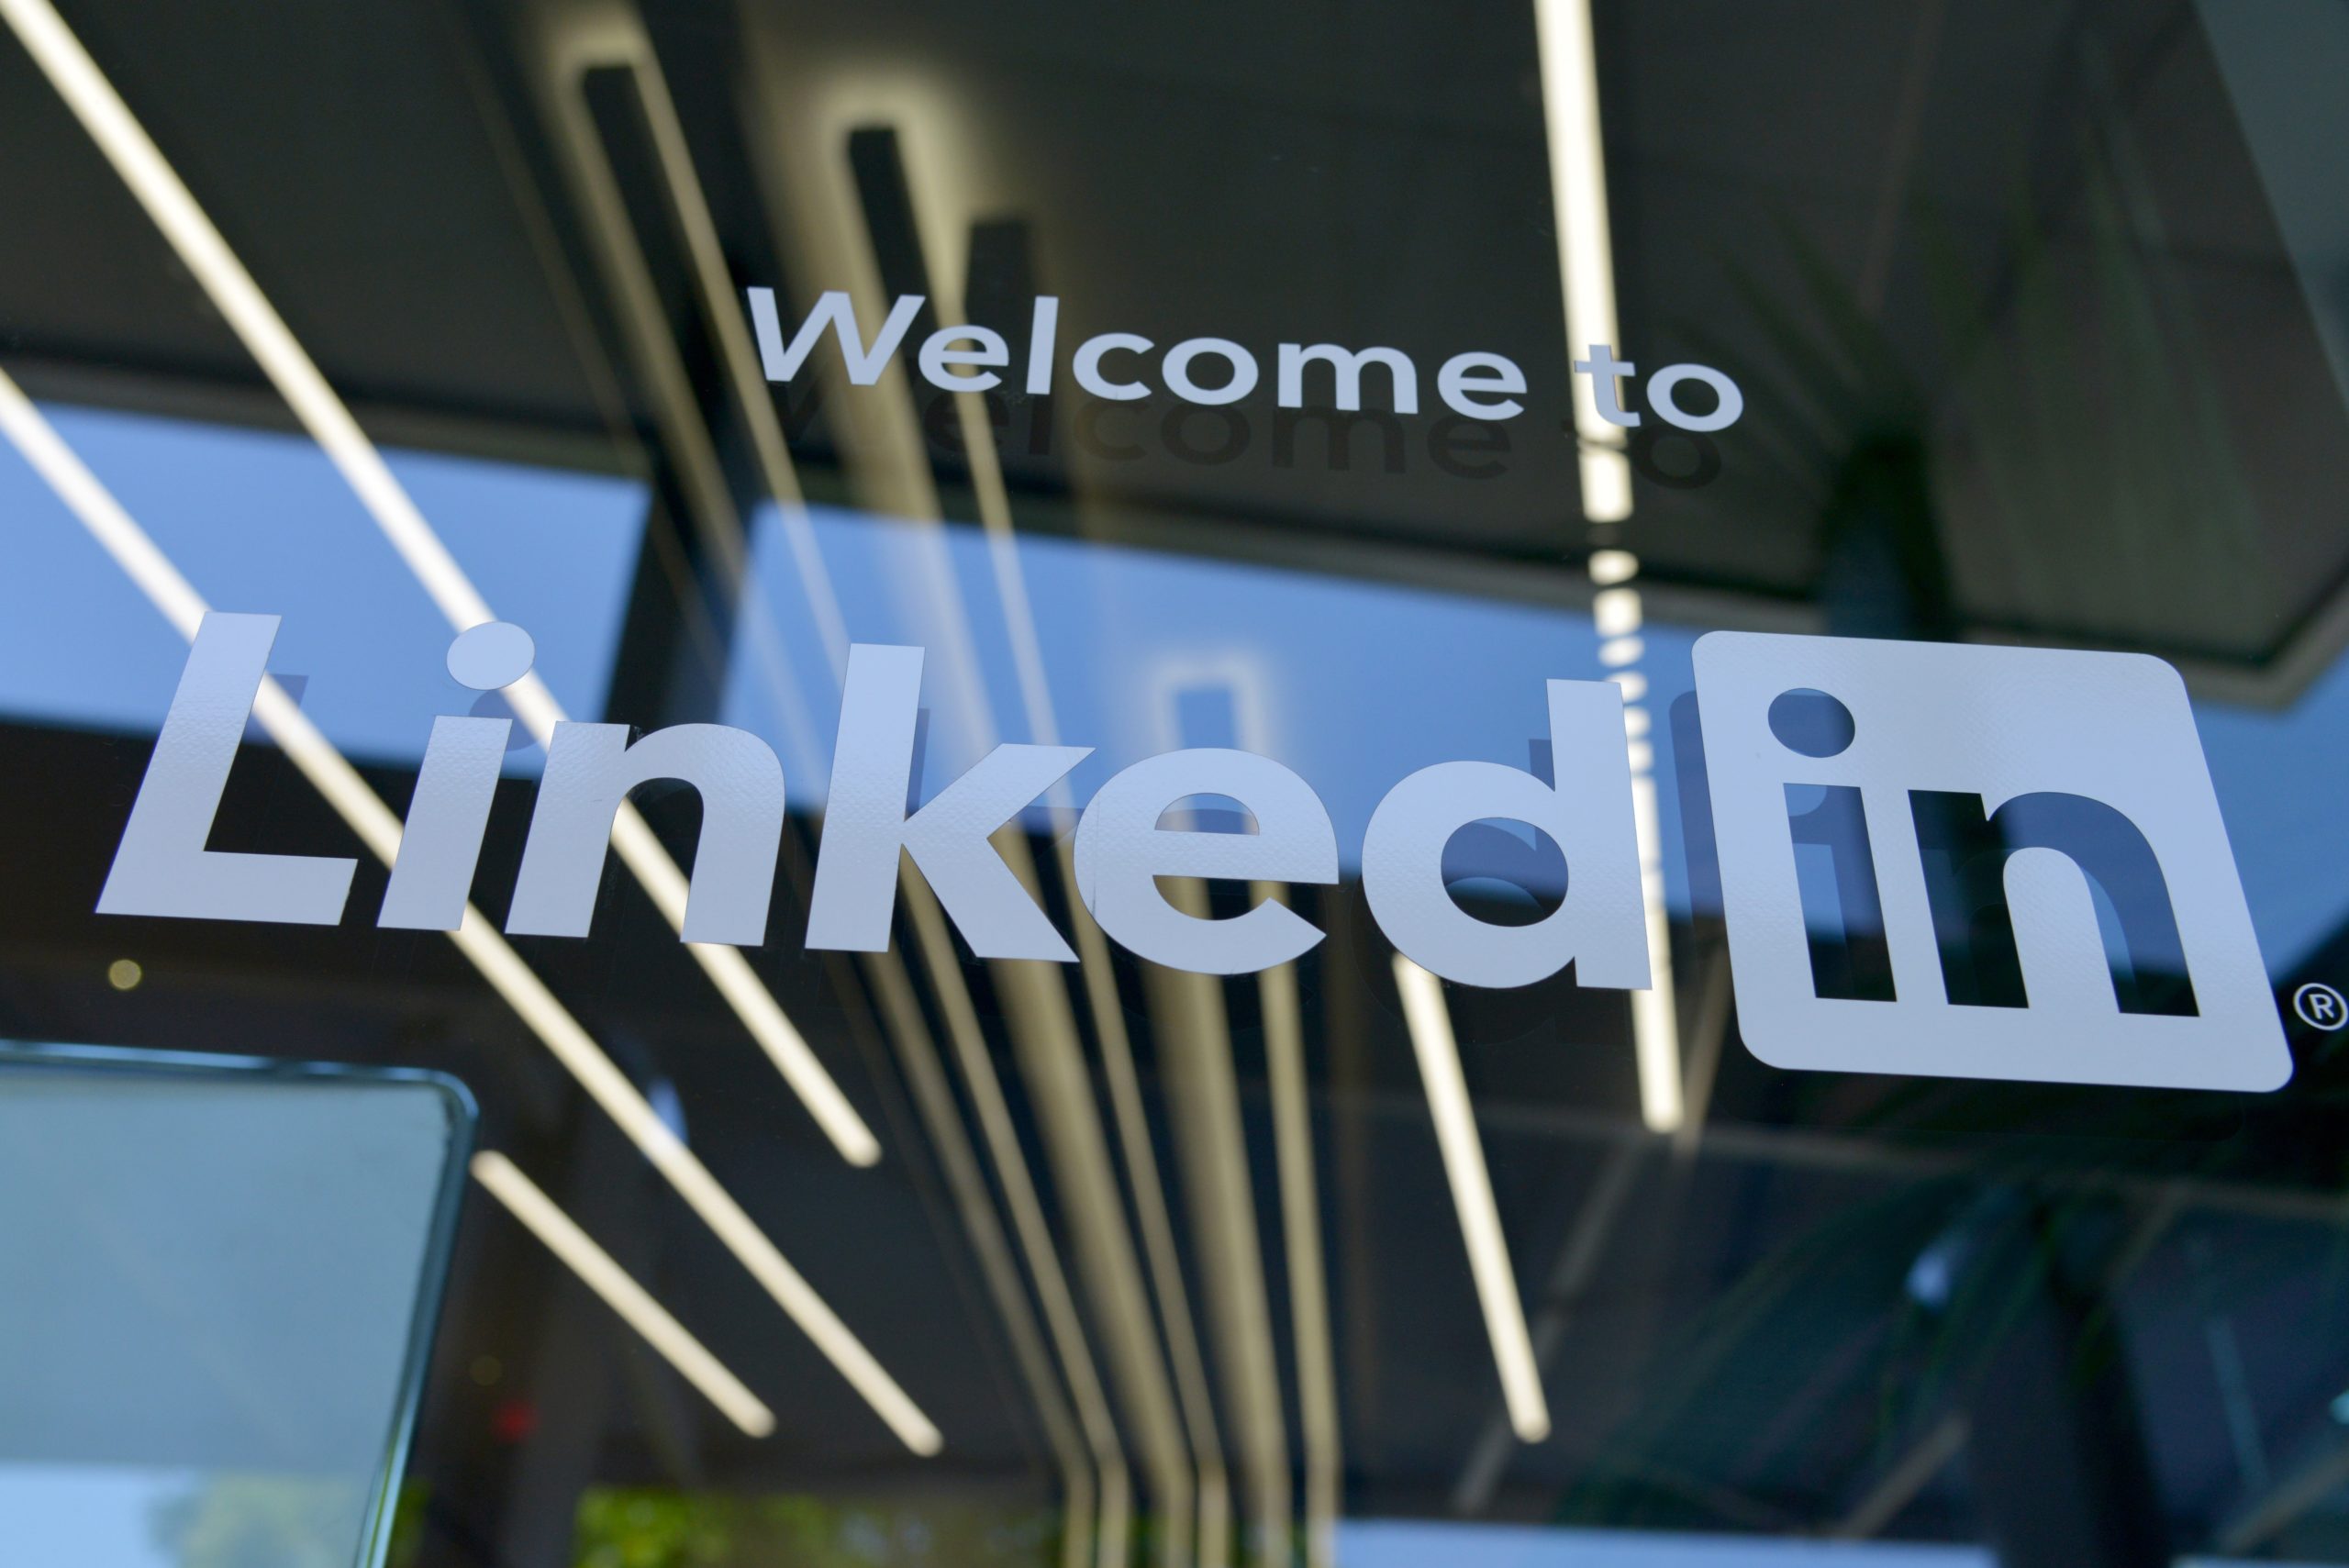 Welcome to LinkedIn sign: How to use LinkedIn as a freelance marketer.